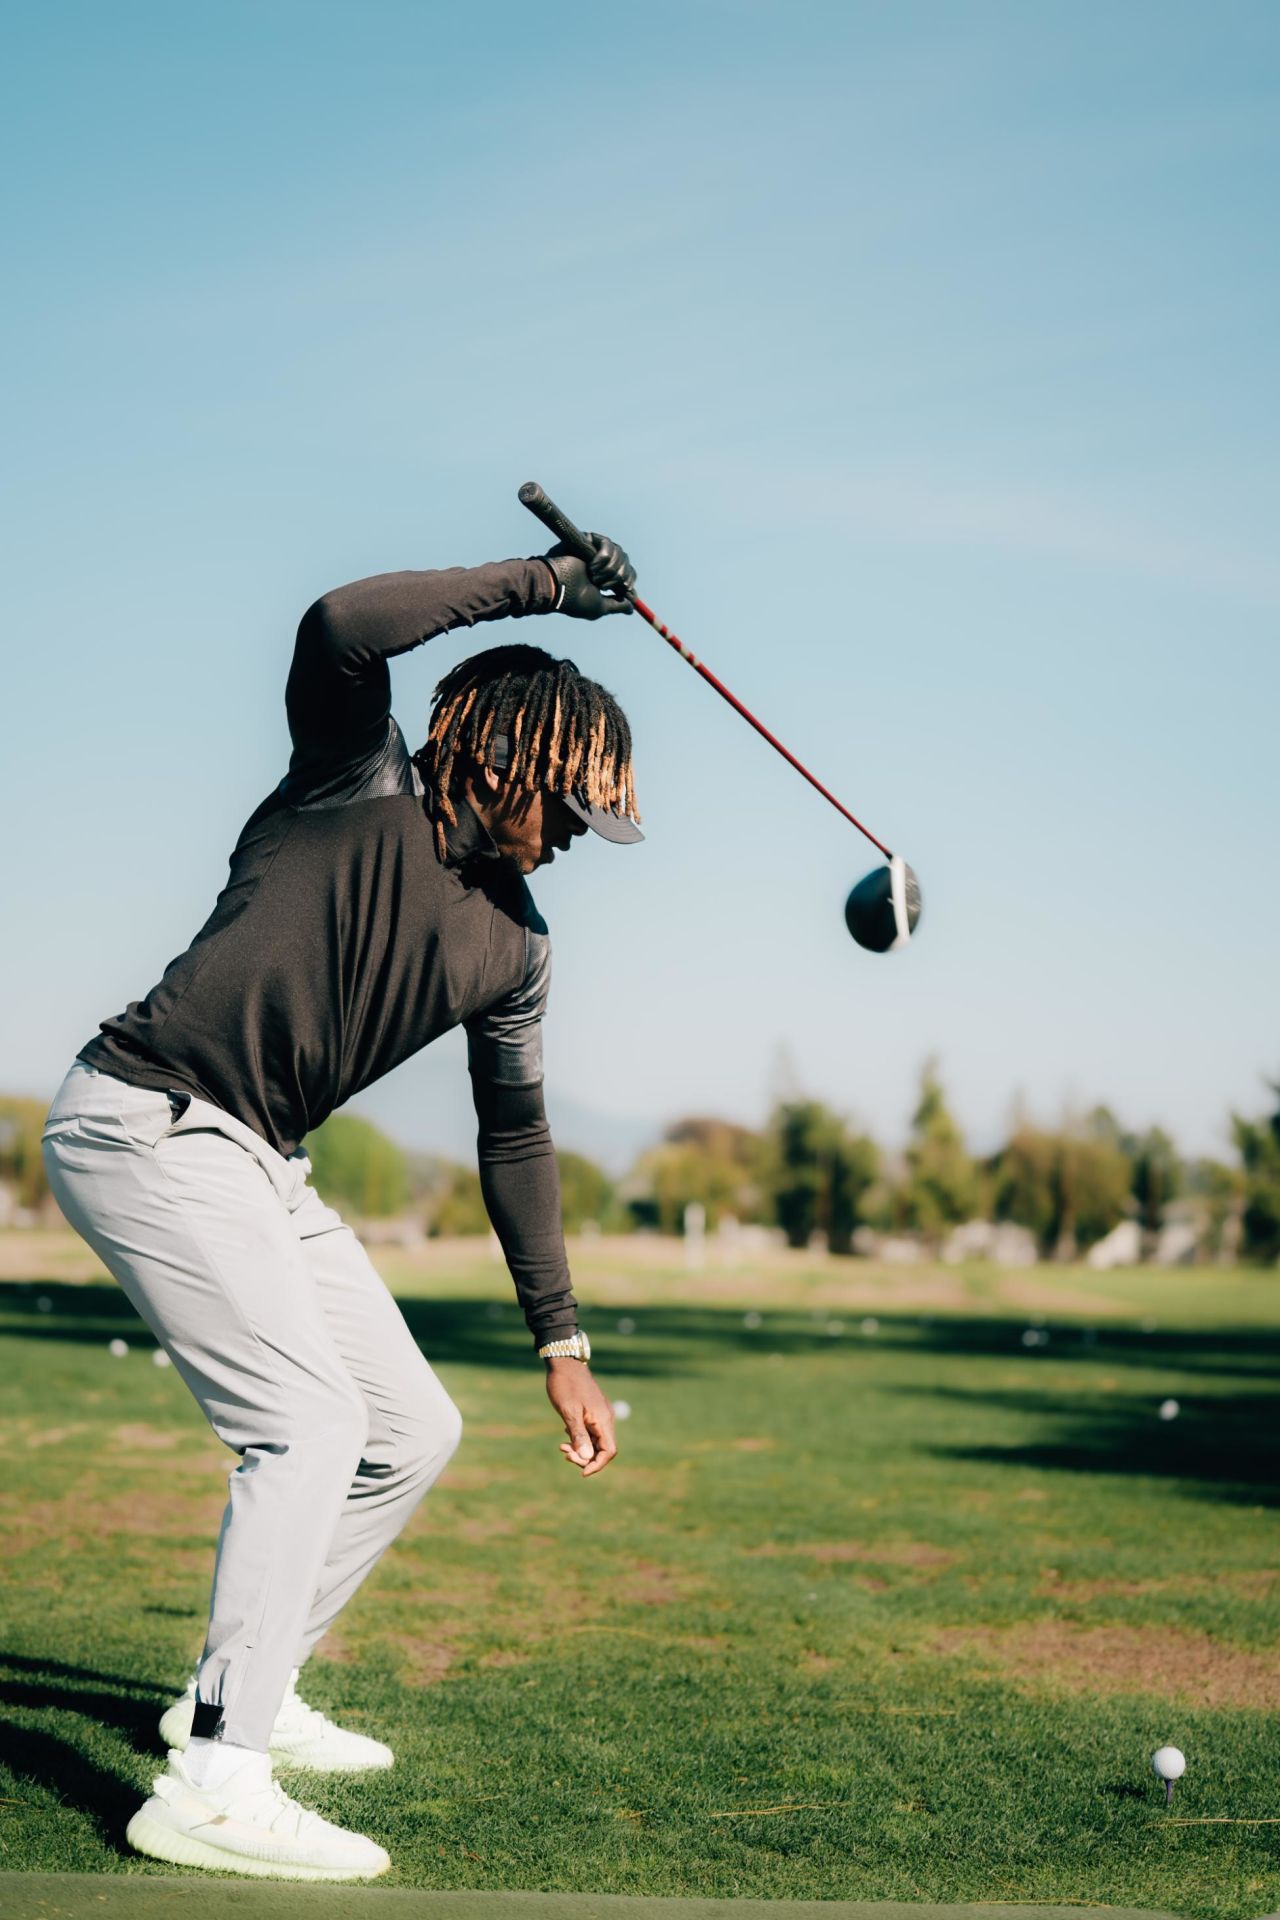 Last year, Canesi played a round with Eliezer Paul-Gindiri, a viral TikTok star better known as <a href="https://www.edition.cnn.com/2022/08/25/golf/snappy-gilmore-one-handed-golf-tiktok-eliezer-paul-gindiri-spc-spt-intl/index.html" target="_blank">Snappy Gilmore</a> for his booming, one-handed technique. "Great guy, great energy," Canesi said. "We made a video together where people think it's impressive that he plays one hand, but I play no hand."